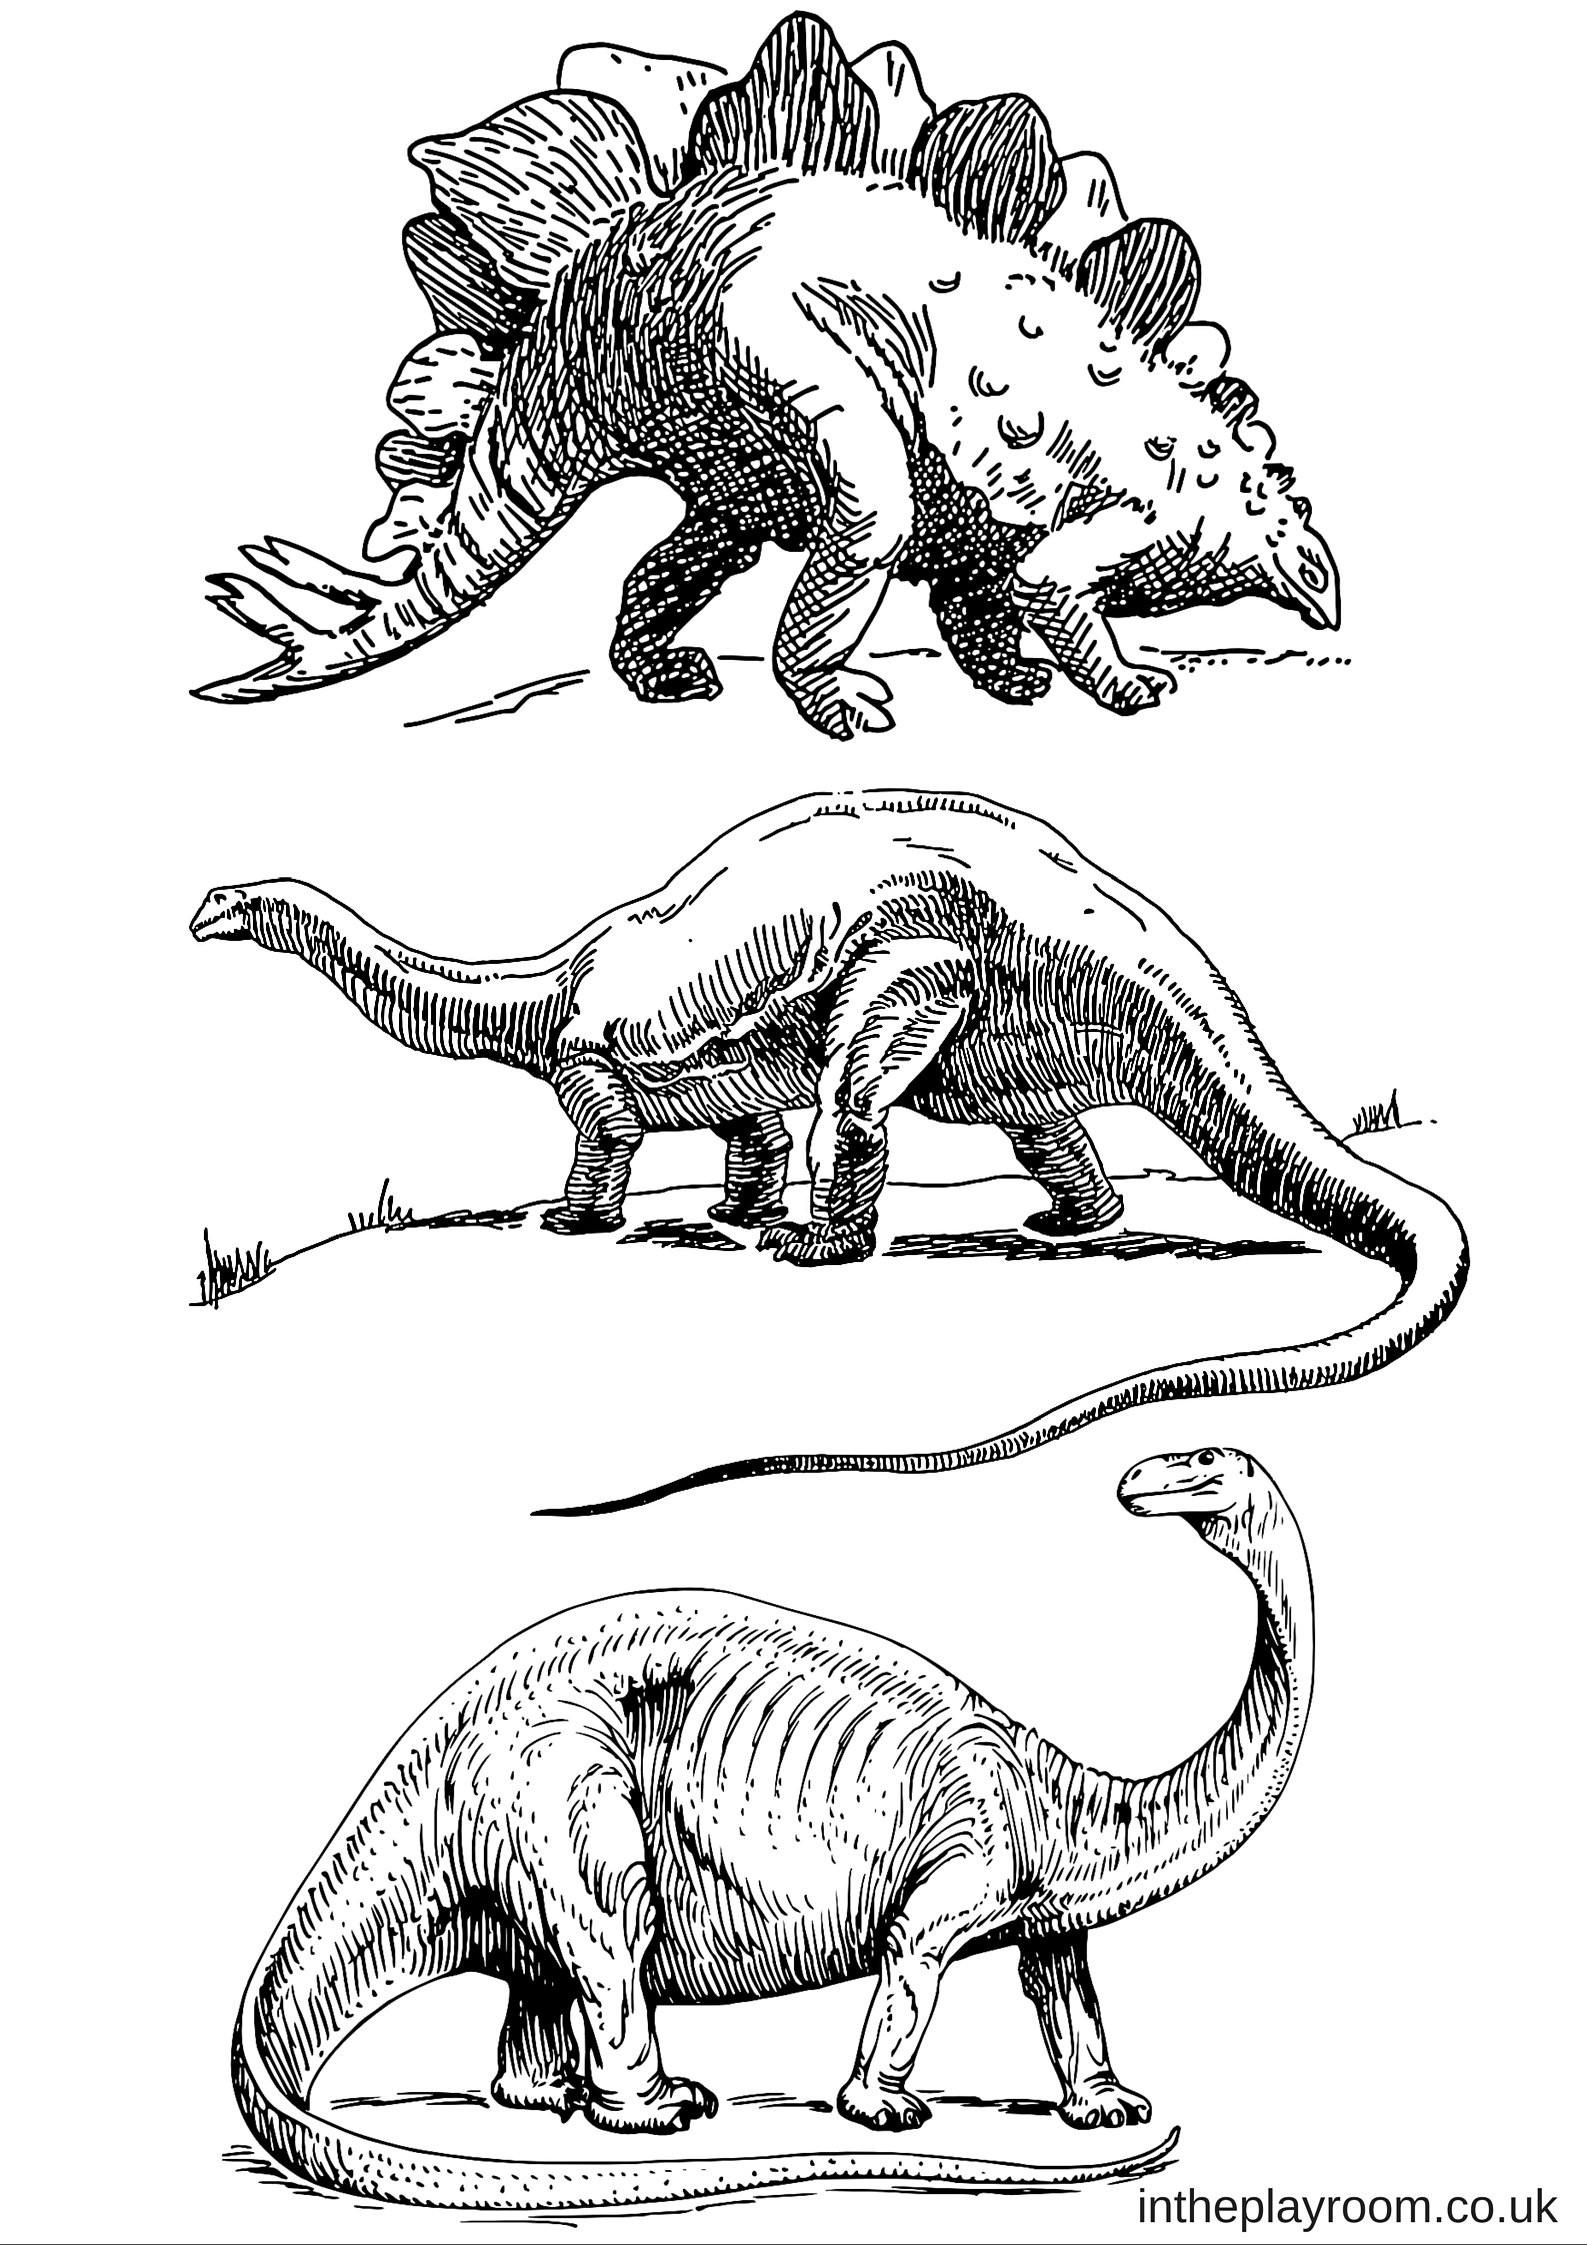 Printable Dinosaur Coloring Pages
 Dinosaur Colouring Pages In The Playroom